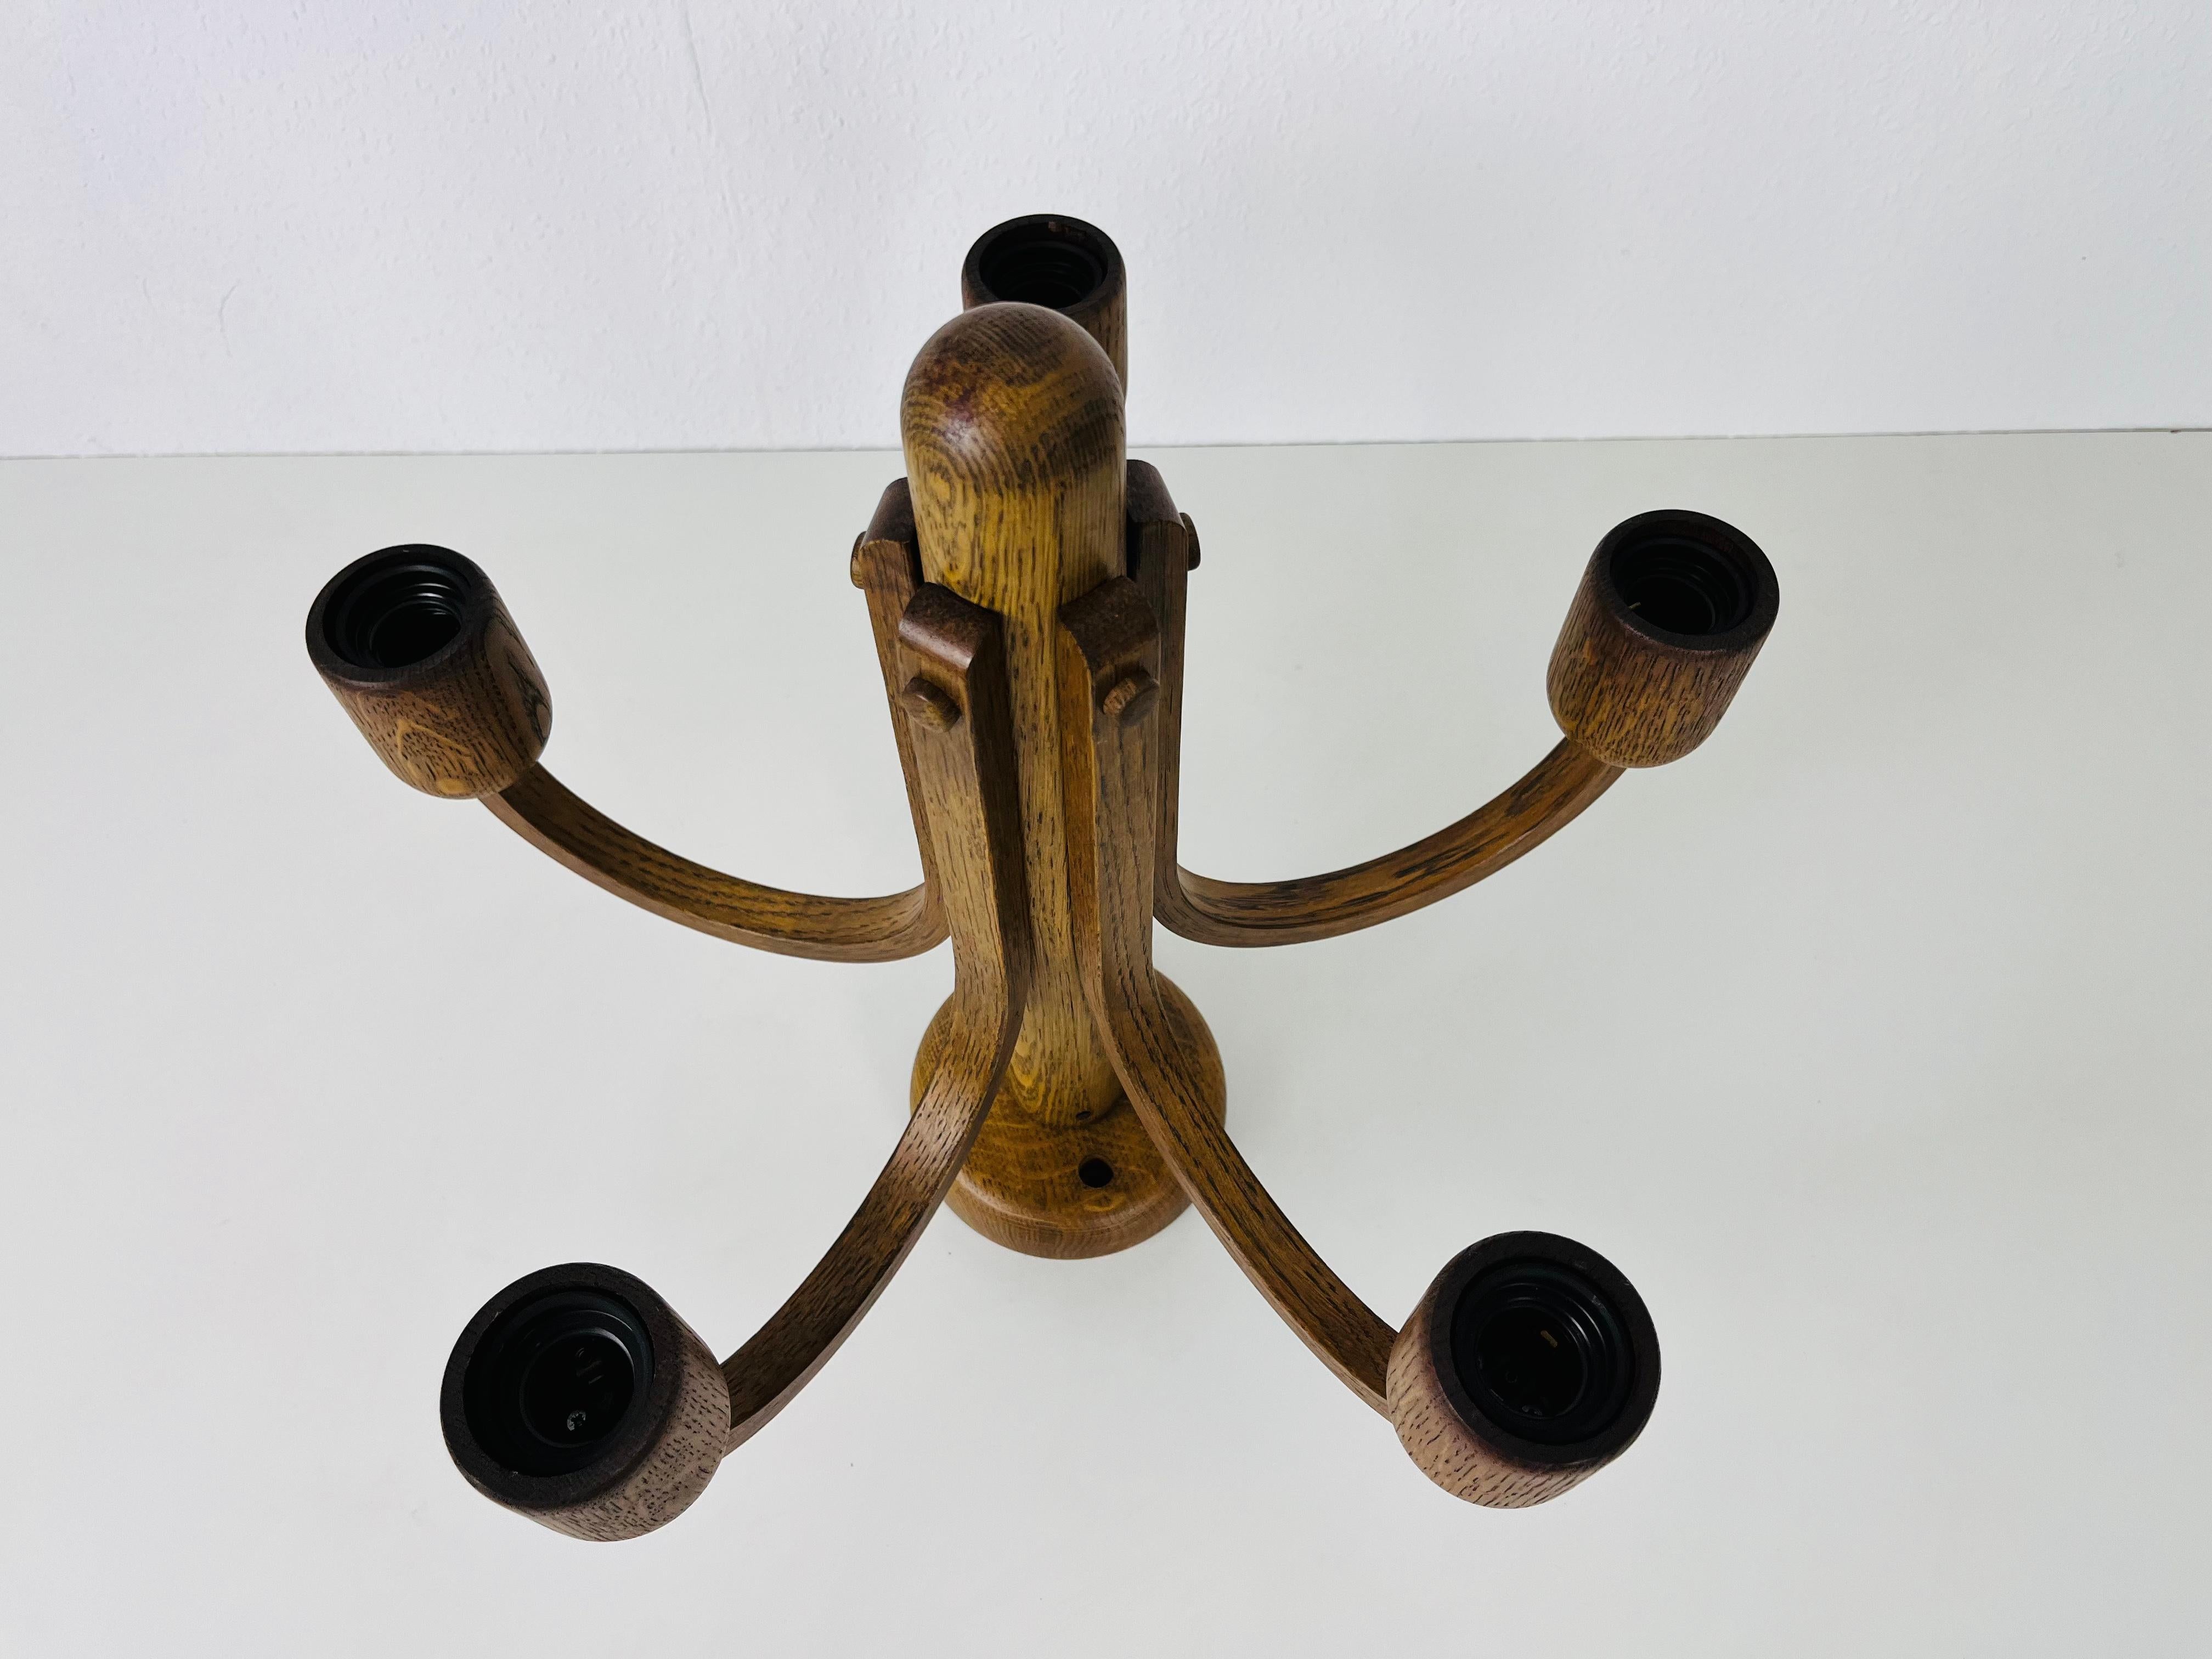 German Midcentury Wooden Pendant Lamp with 5 Arms by Domus, 1960s For Sale